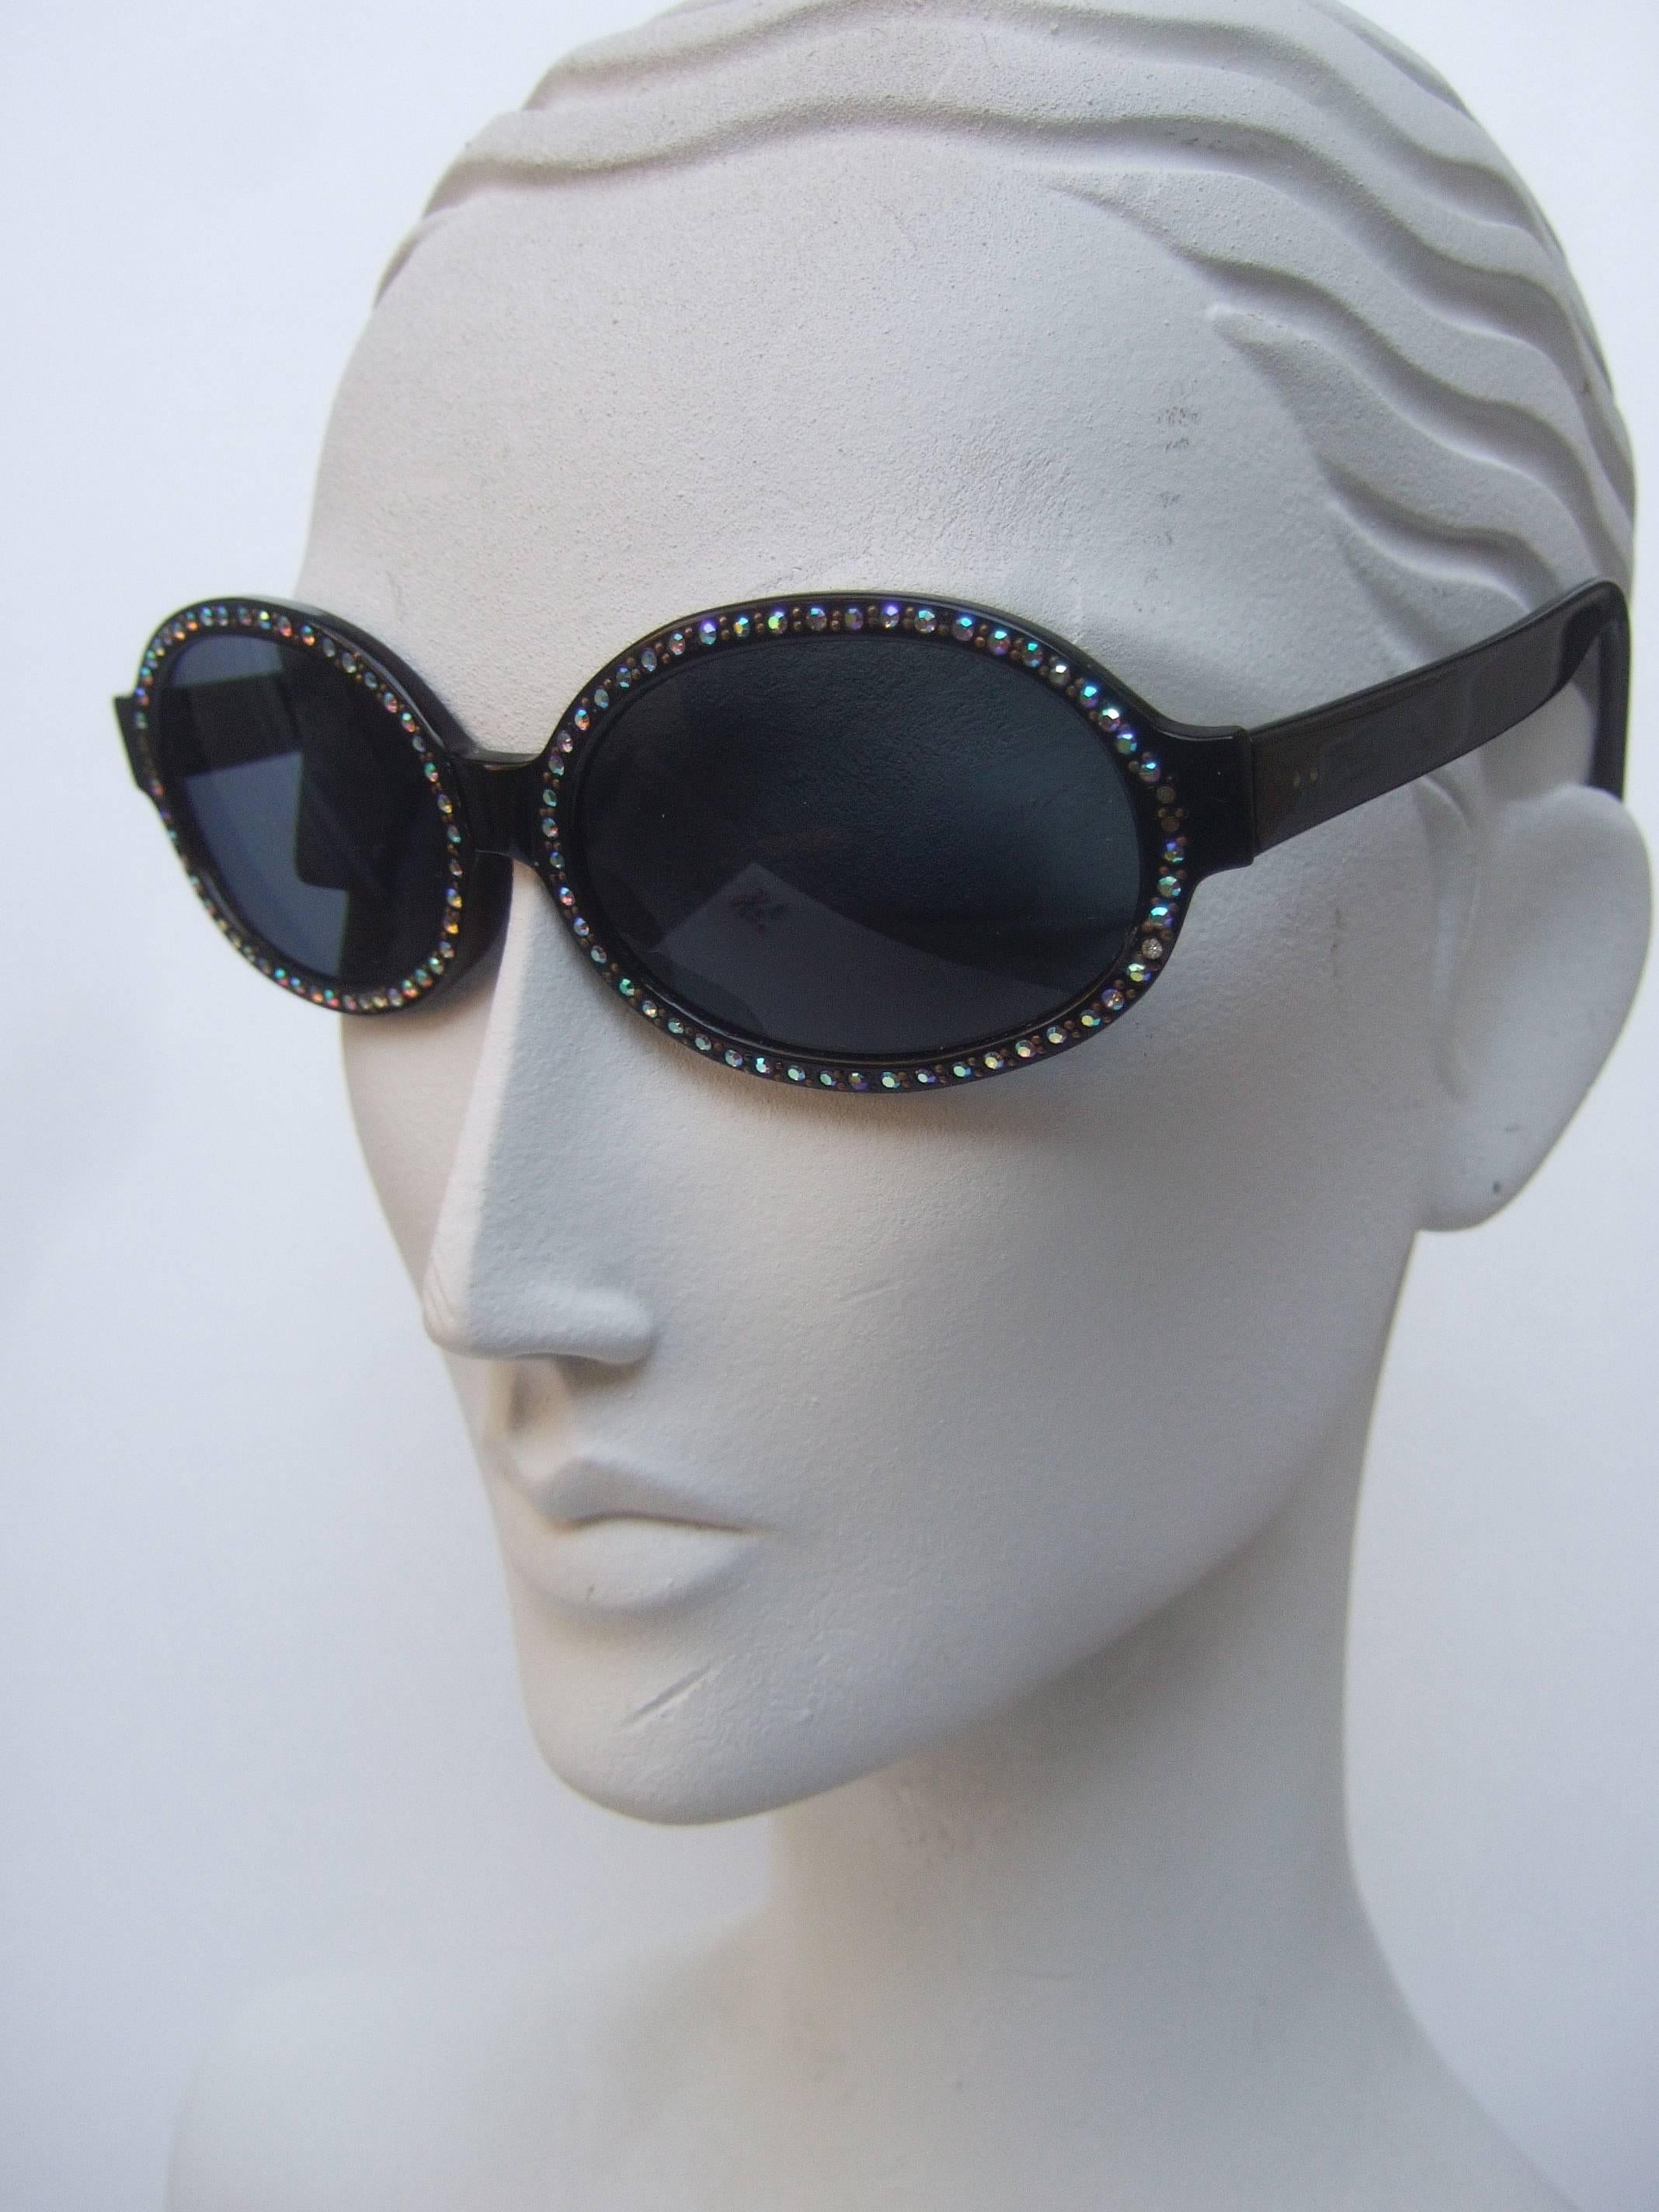 Chic black luicte crystal trim tinted sunglasses Made in France
The stylish eyeglasses are embellished with 
glittering auroraborealis crystals that circle 
the oval glass tinted lenses

The tinted glass lenses are gray in color 
The handmade